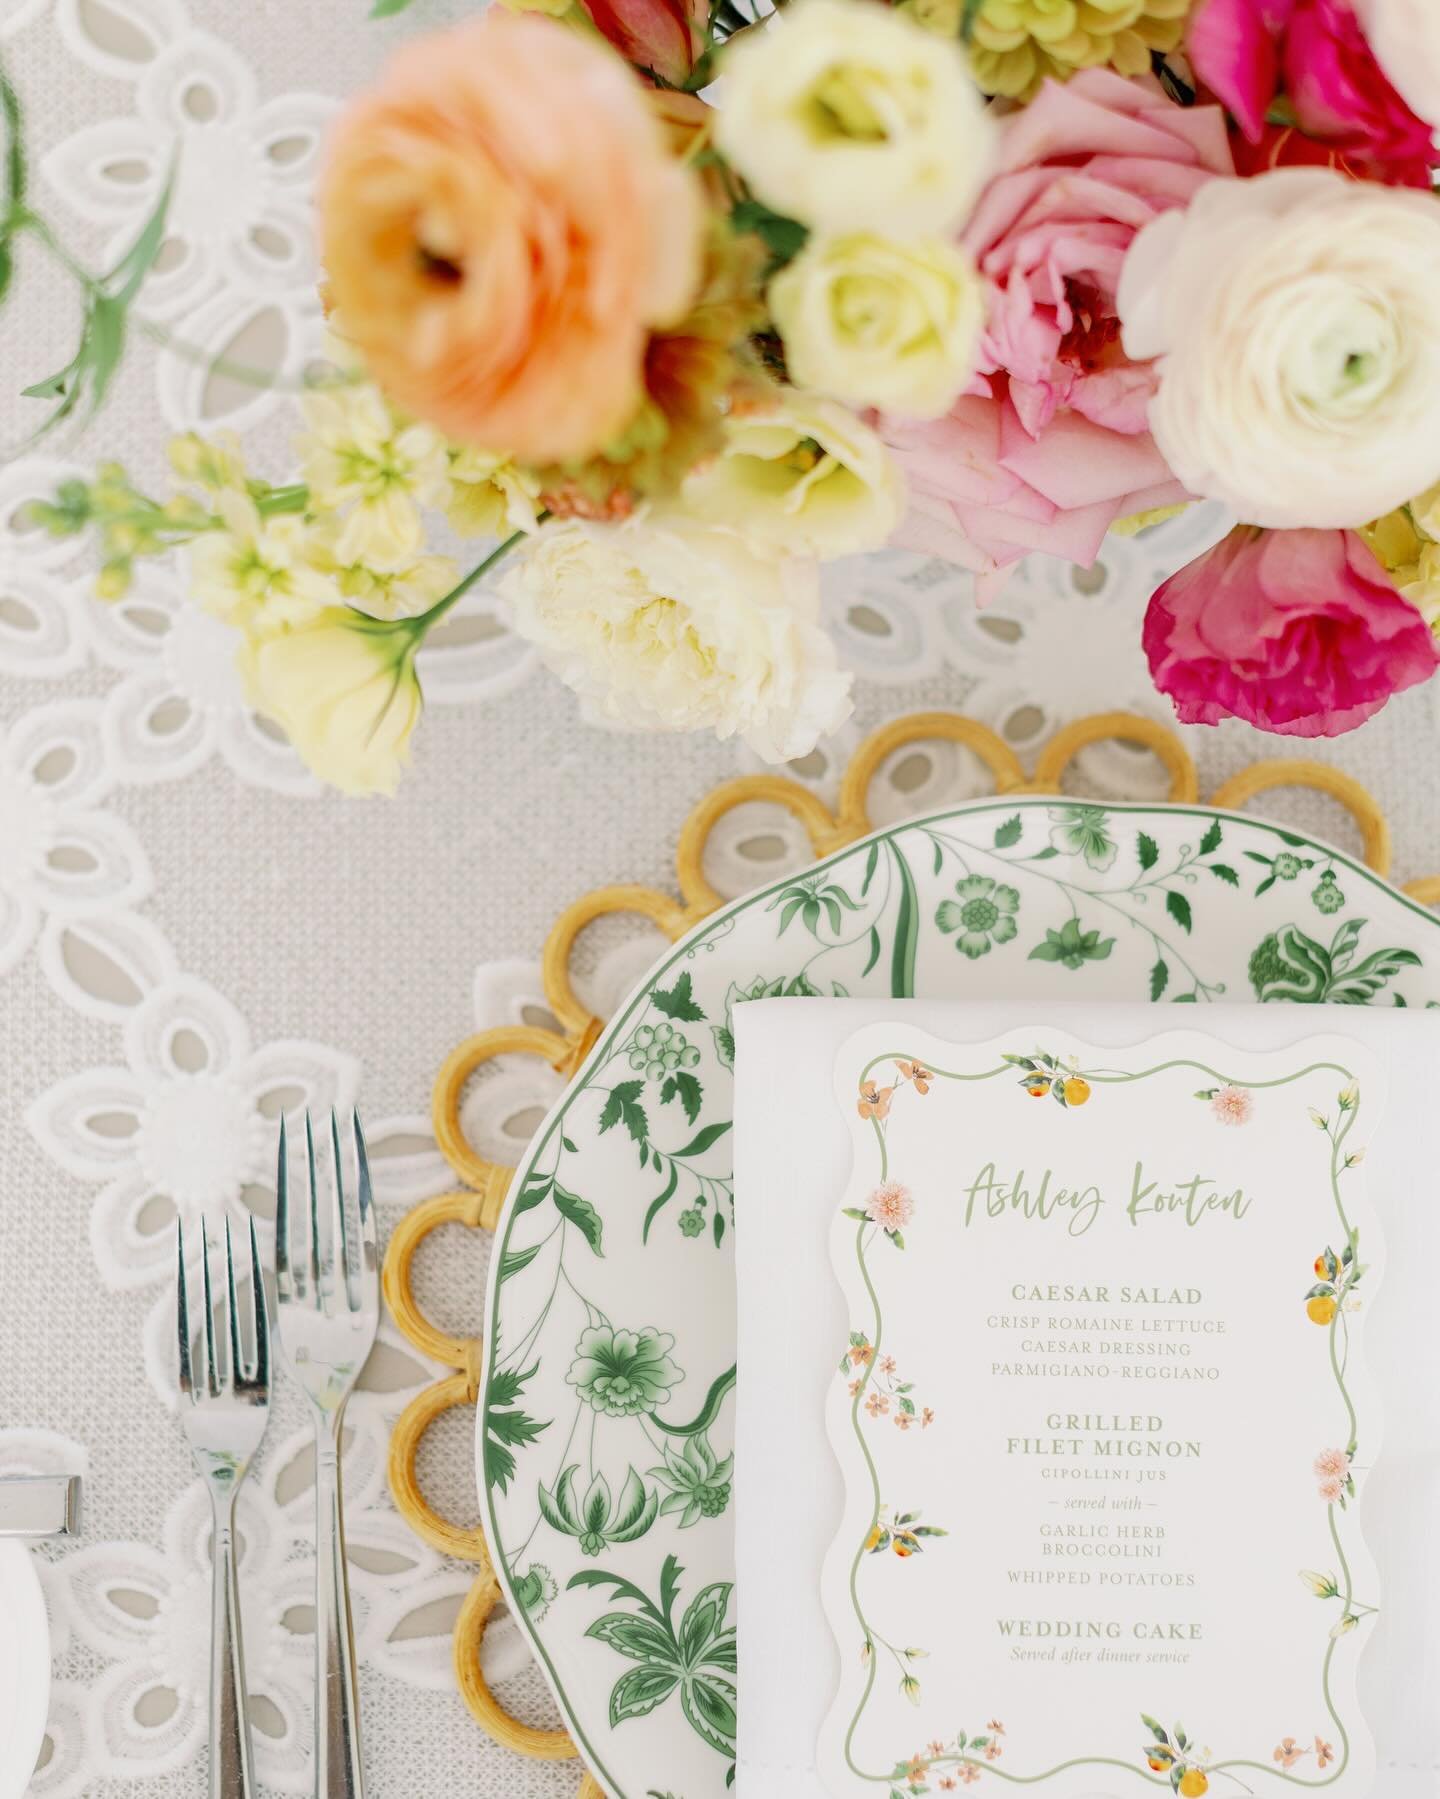 The happiest place setting featuring our favorite hand-painted candles by our very own, Amanda!
.
.
.
Photo: @haleyjane.photography 
Floral: @kateasireflowers 
Rentals: @curatedeventscharleston  @professionalparty 
Stationery: @studiordesign 

#charl